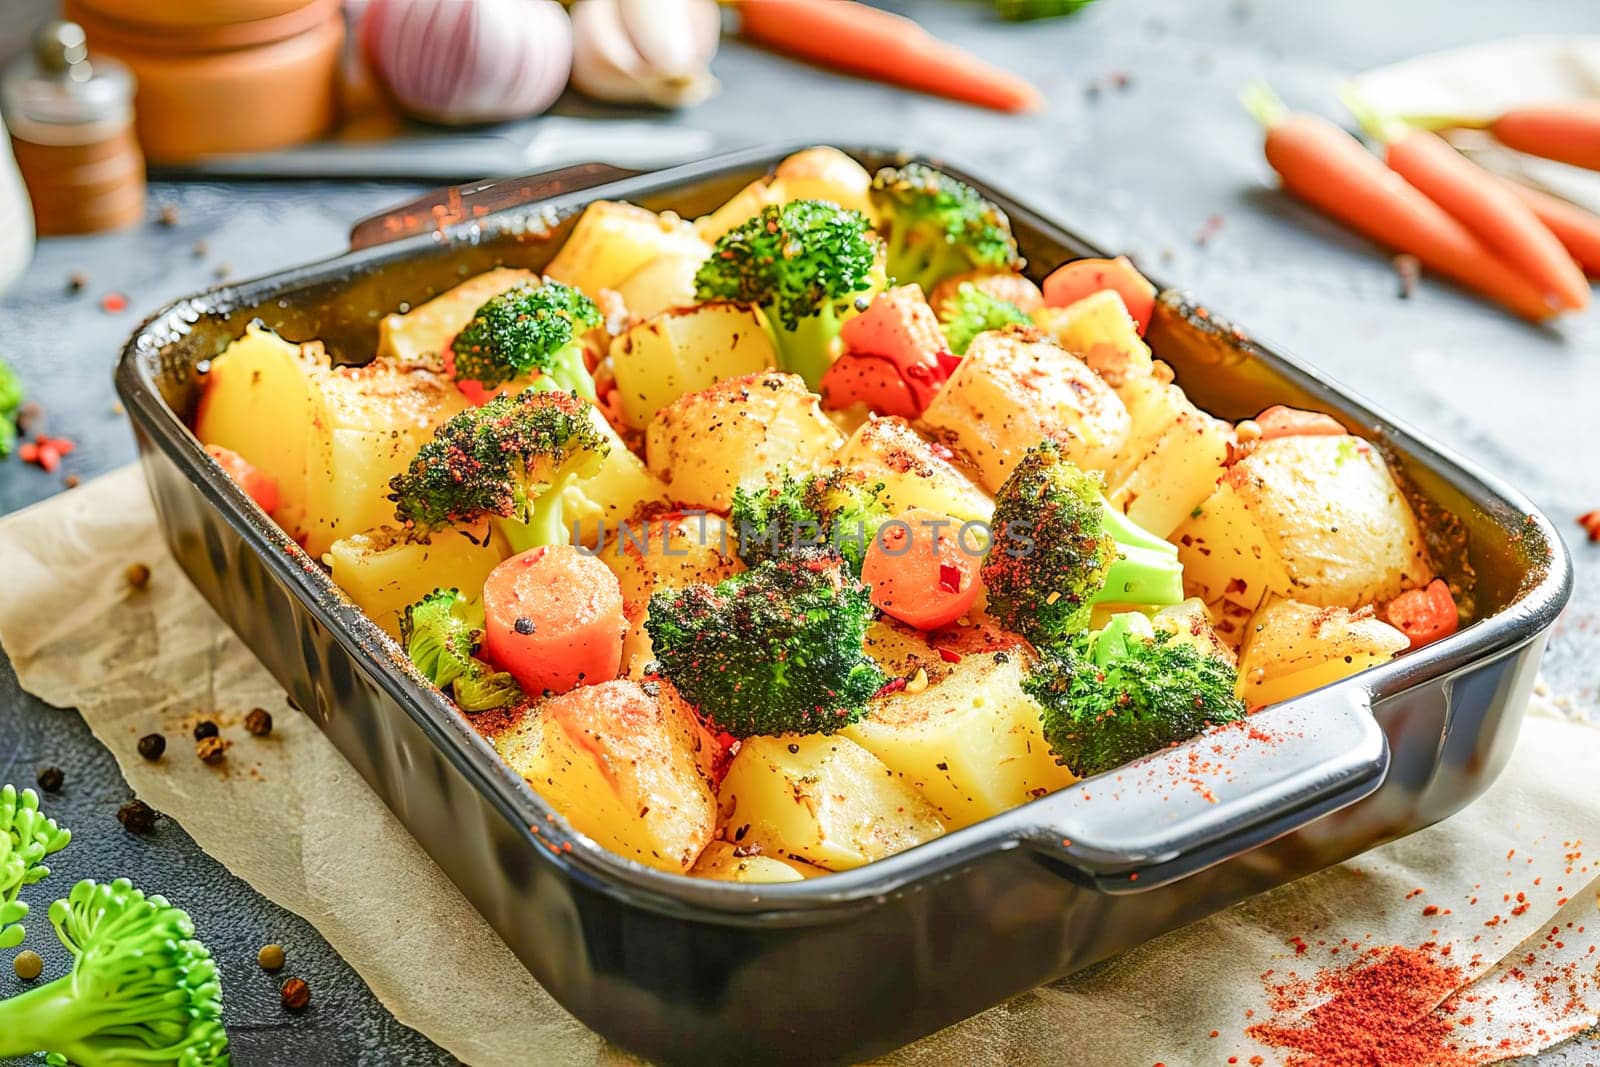 Vegetable casserole of potatoes, carrots and broccoli in a baking dish. by OlgaGubskaya